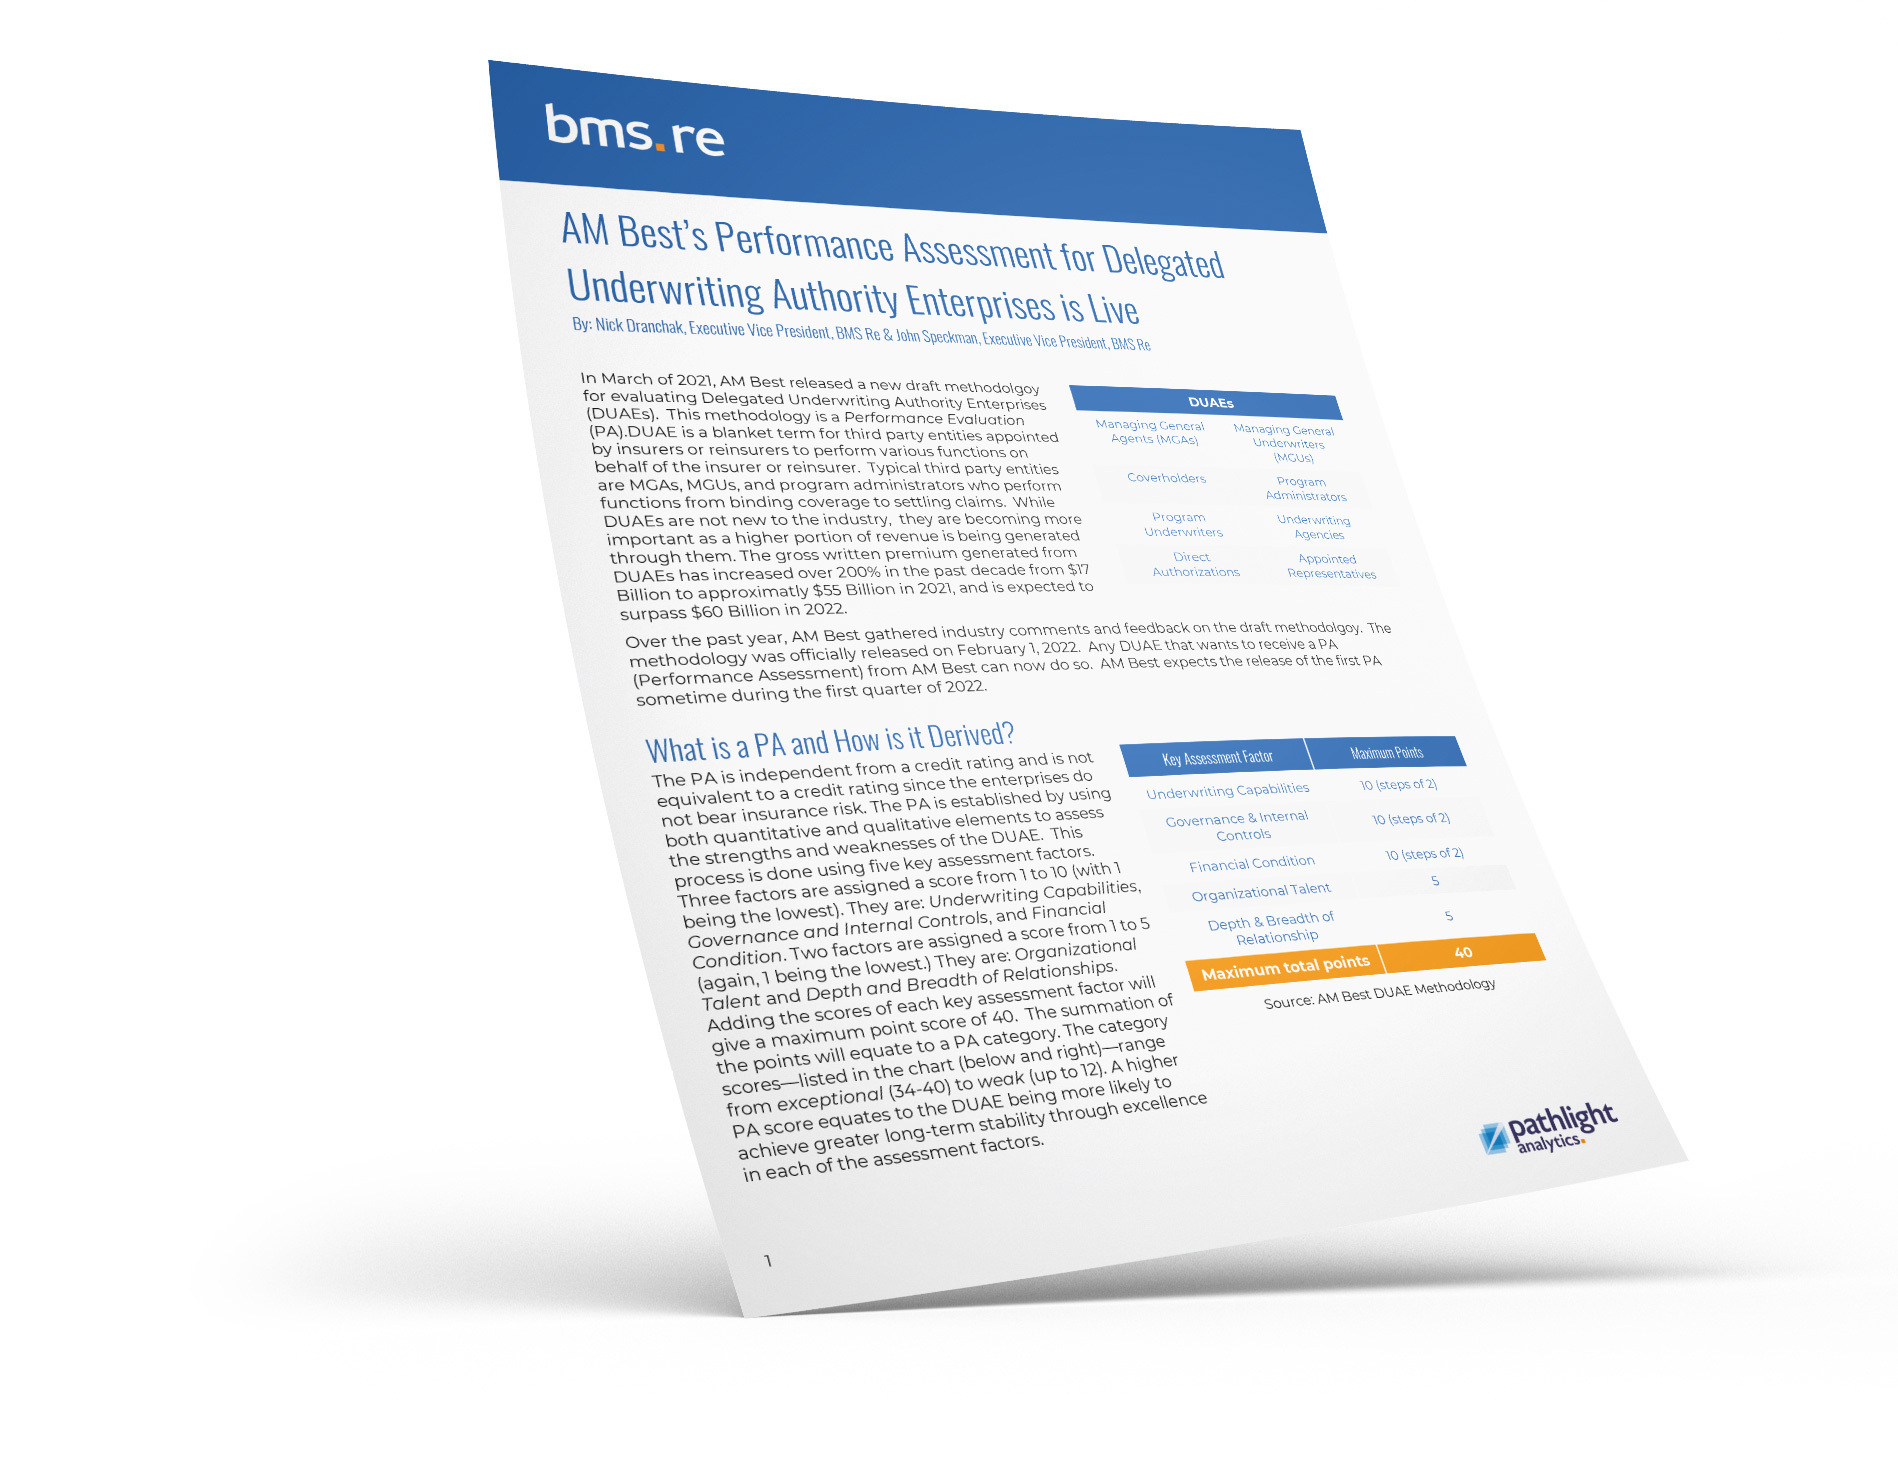 AM Best’s Performance Assessment for Delegated Underwriting Authority Enterprises is Live